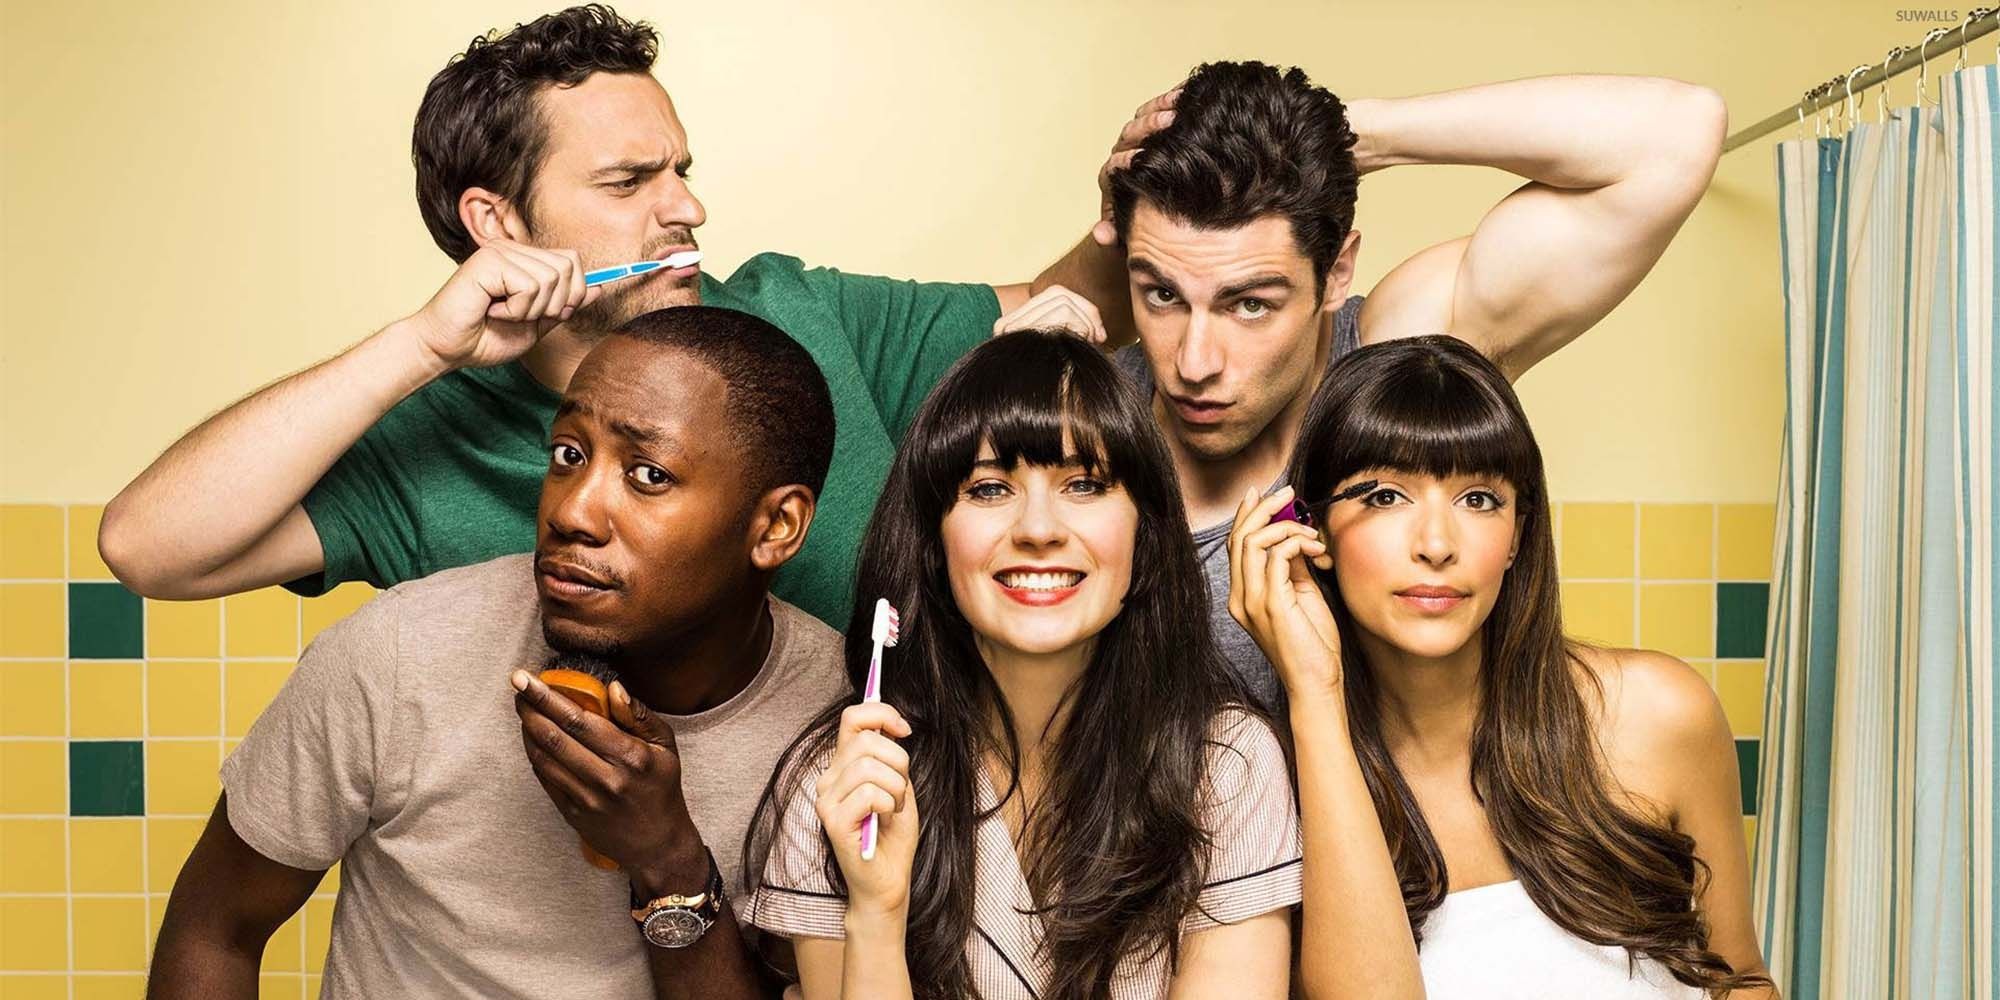 All of the main characters from New Girl